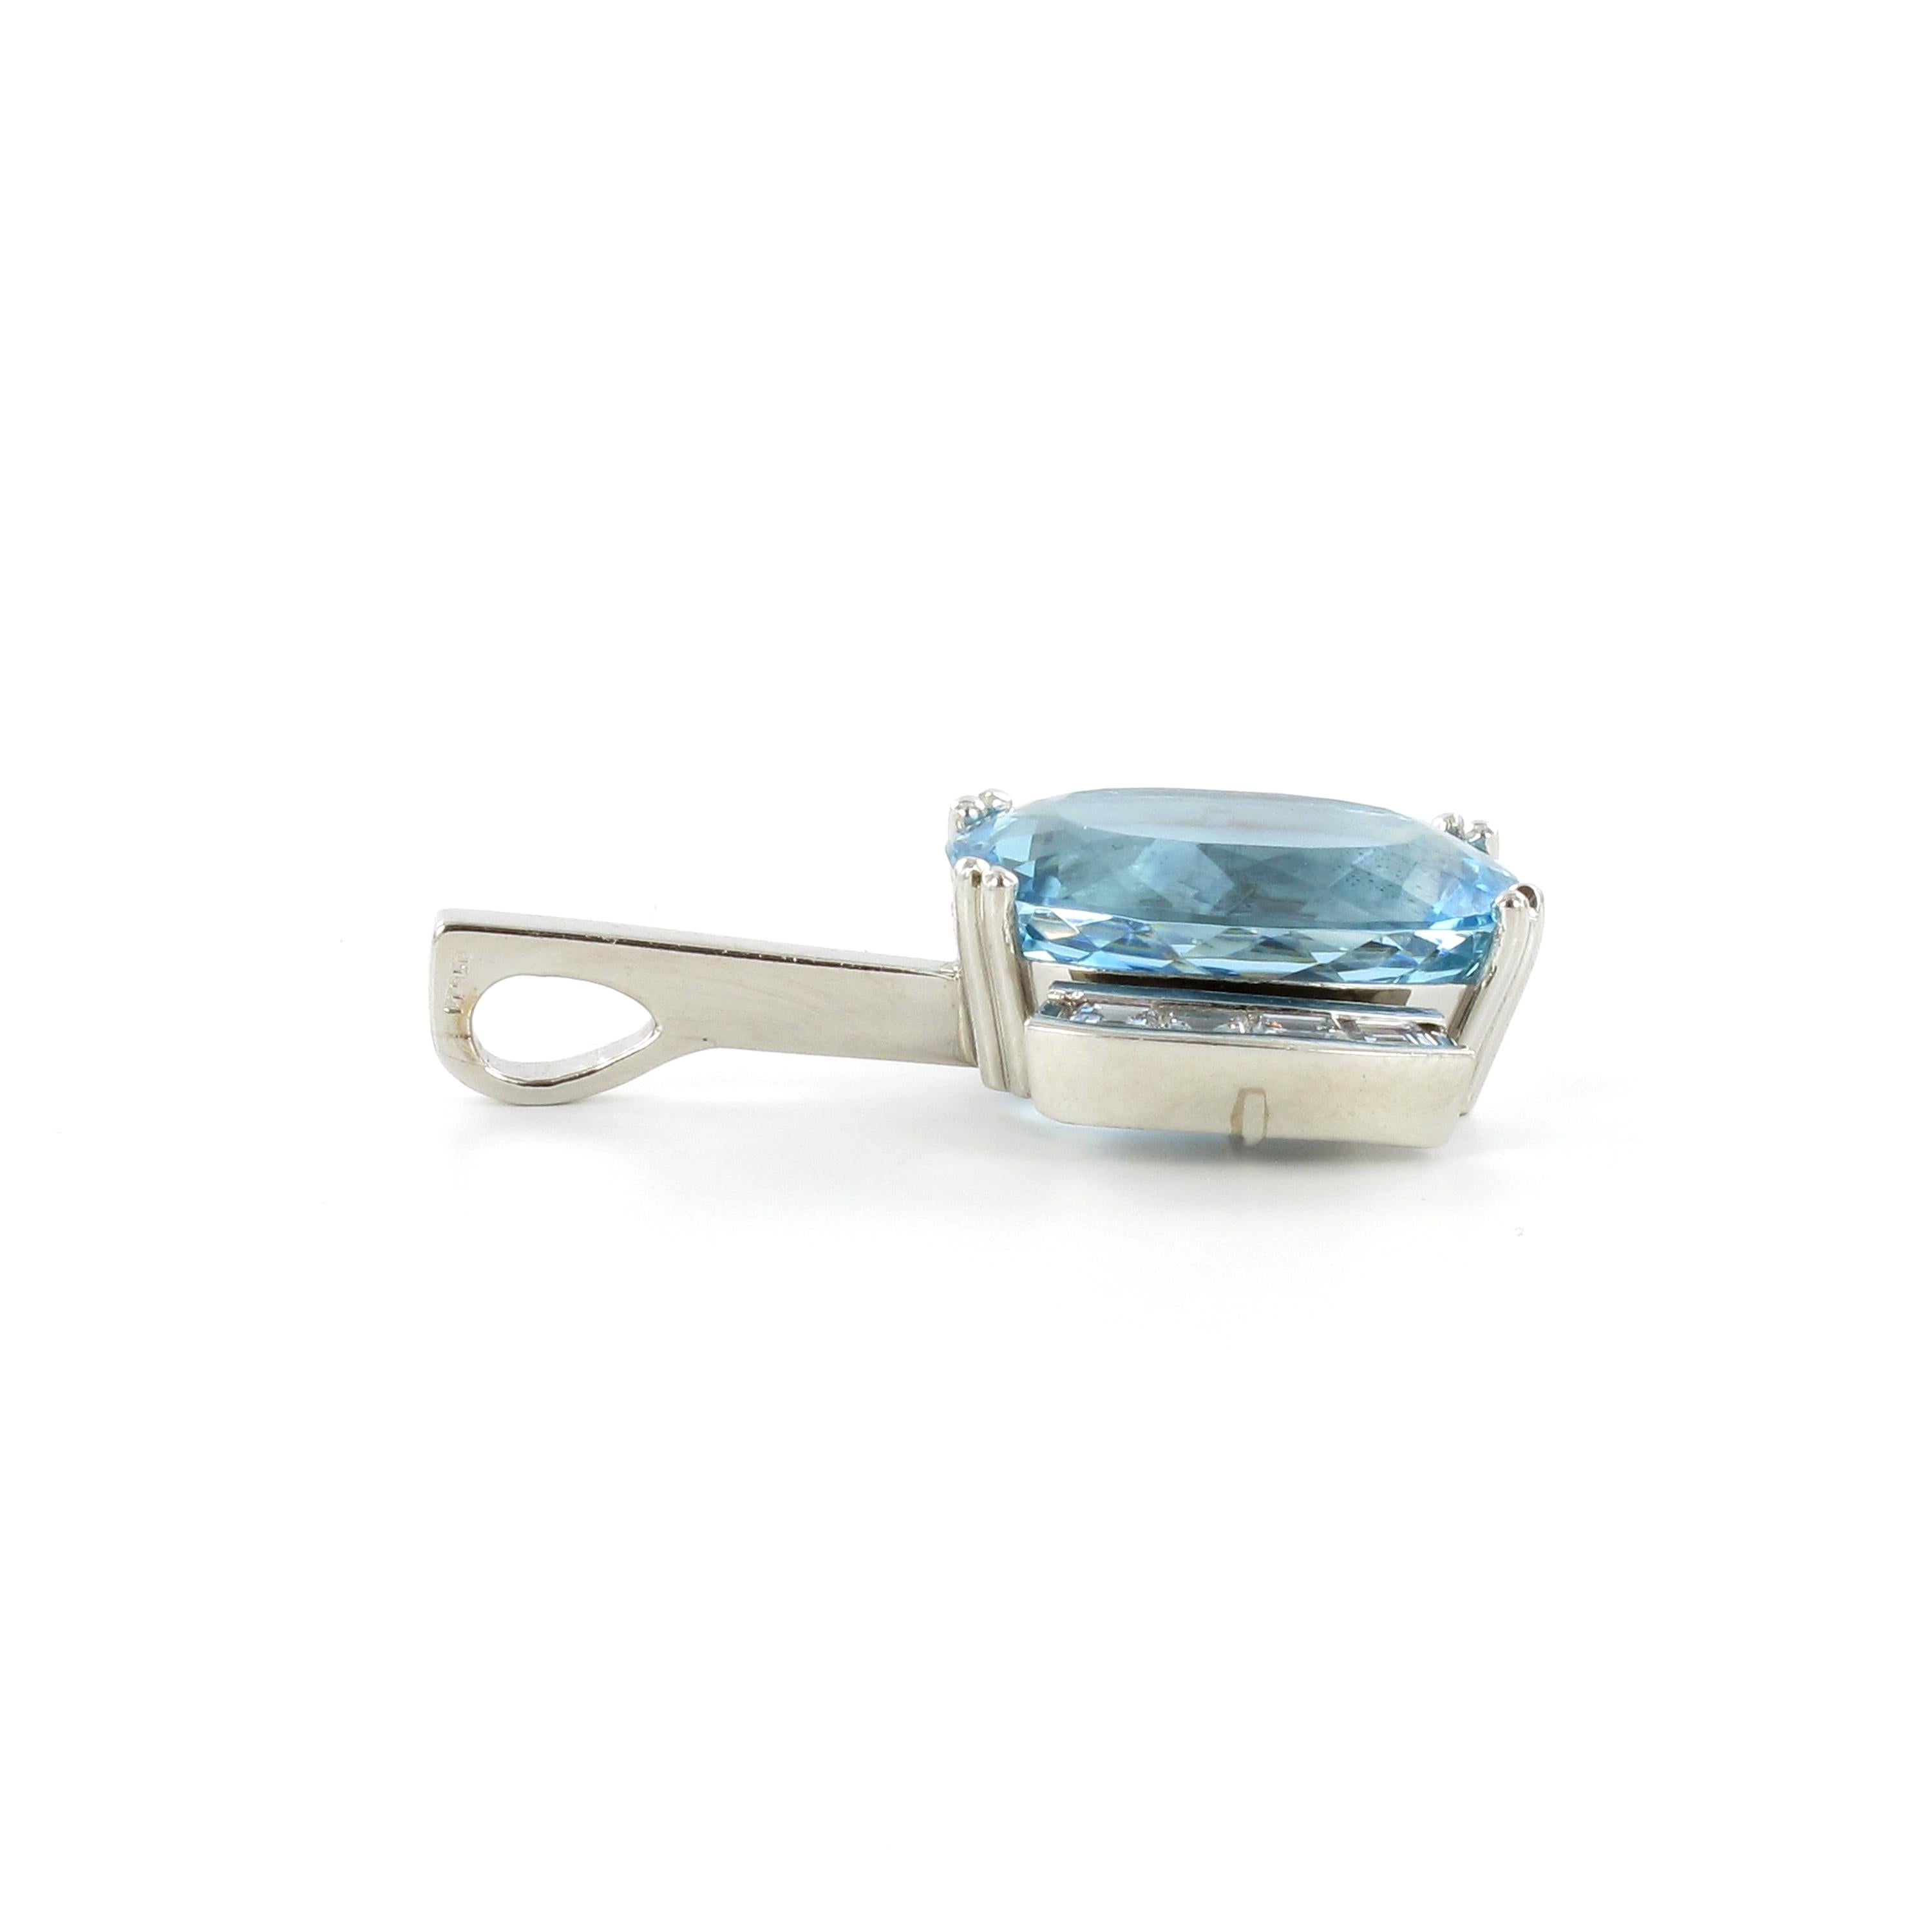 Aquamarine and Diamond Necklace in Platinum 950 and 18 Karat White Gold For Sale 3